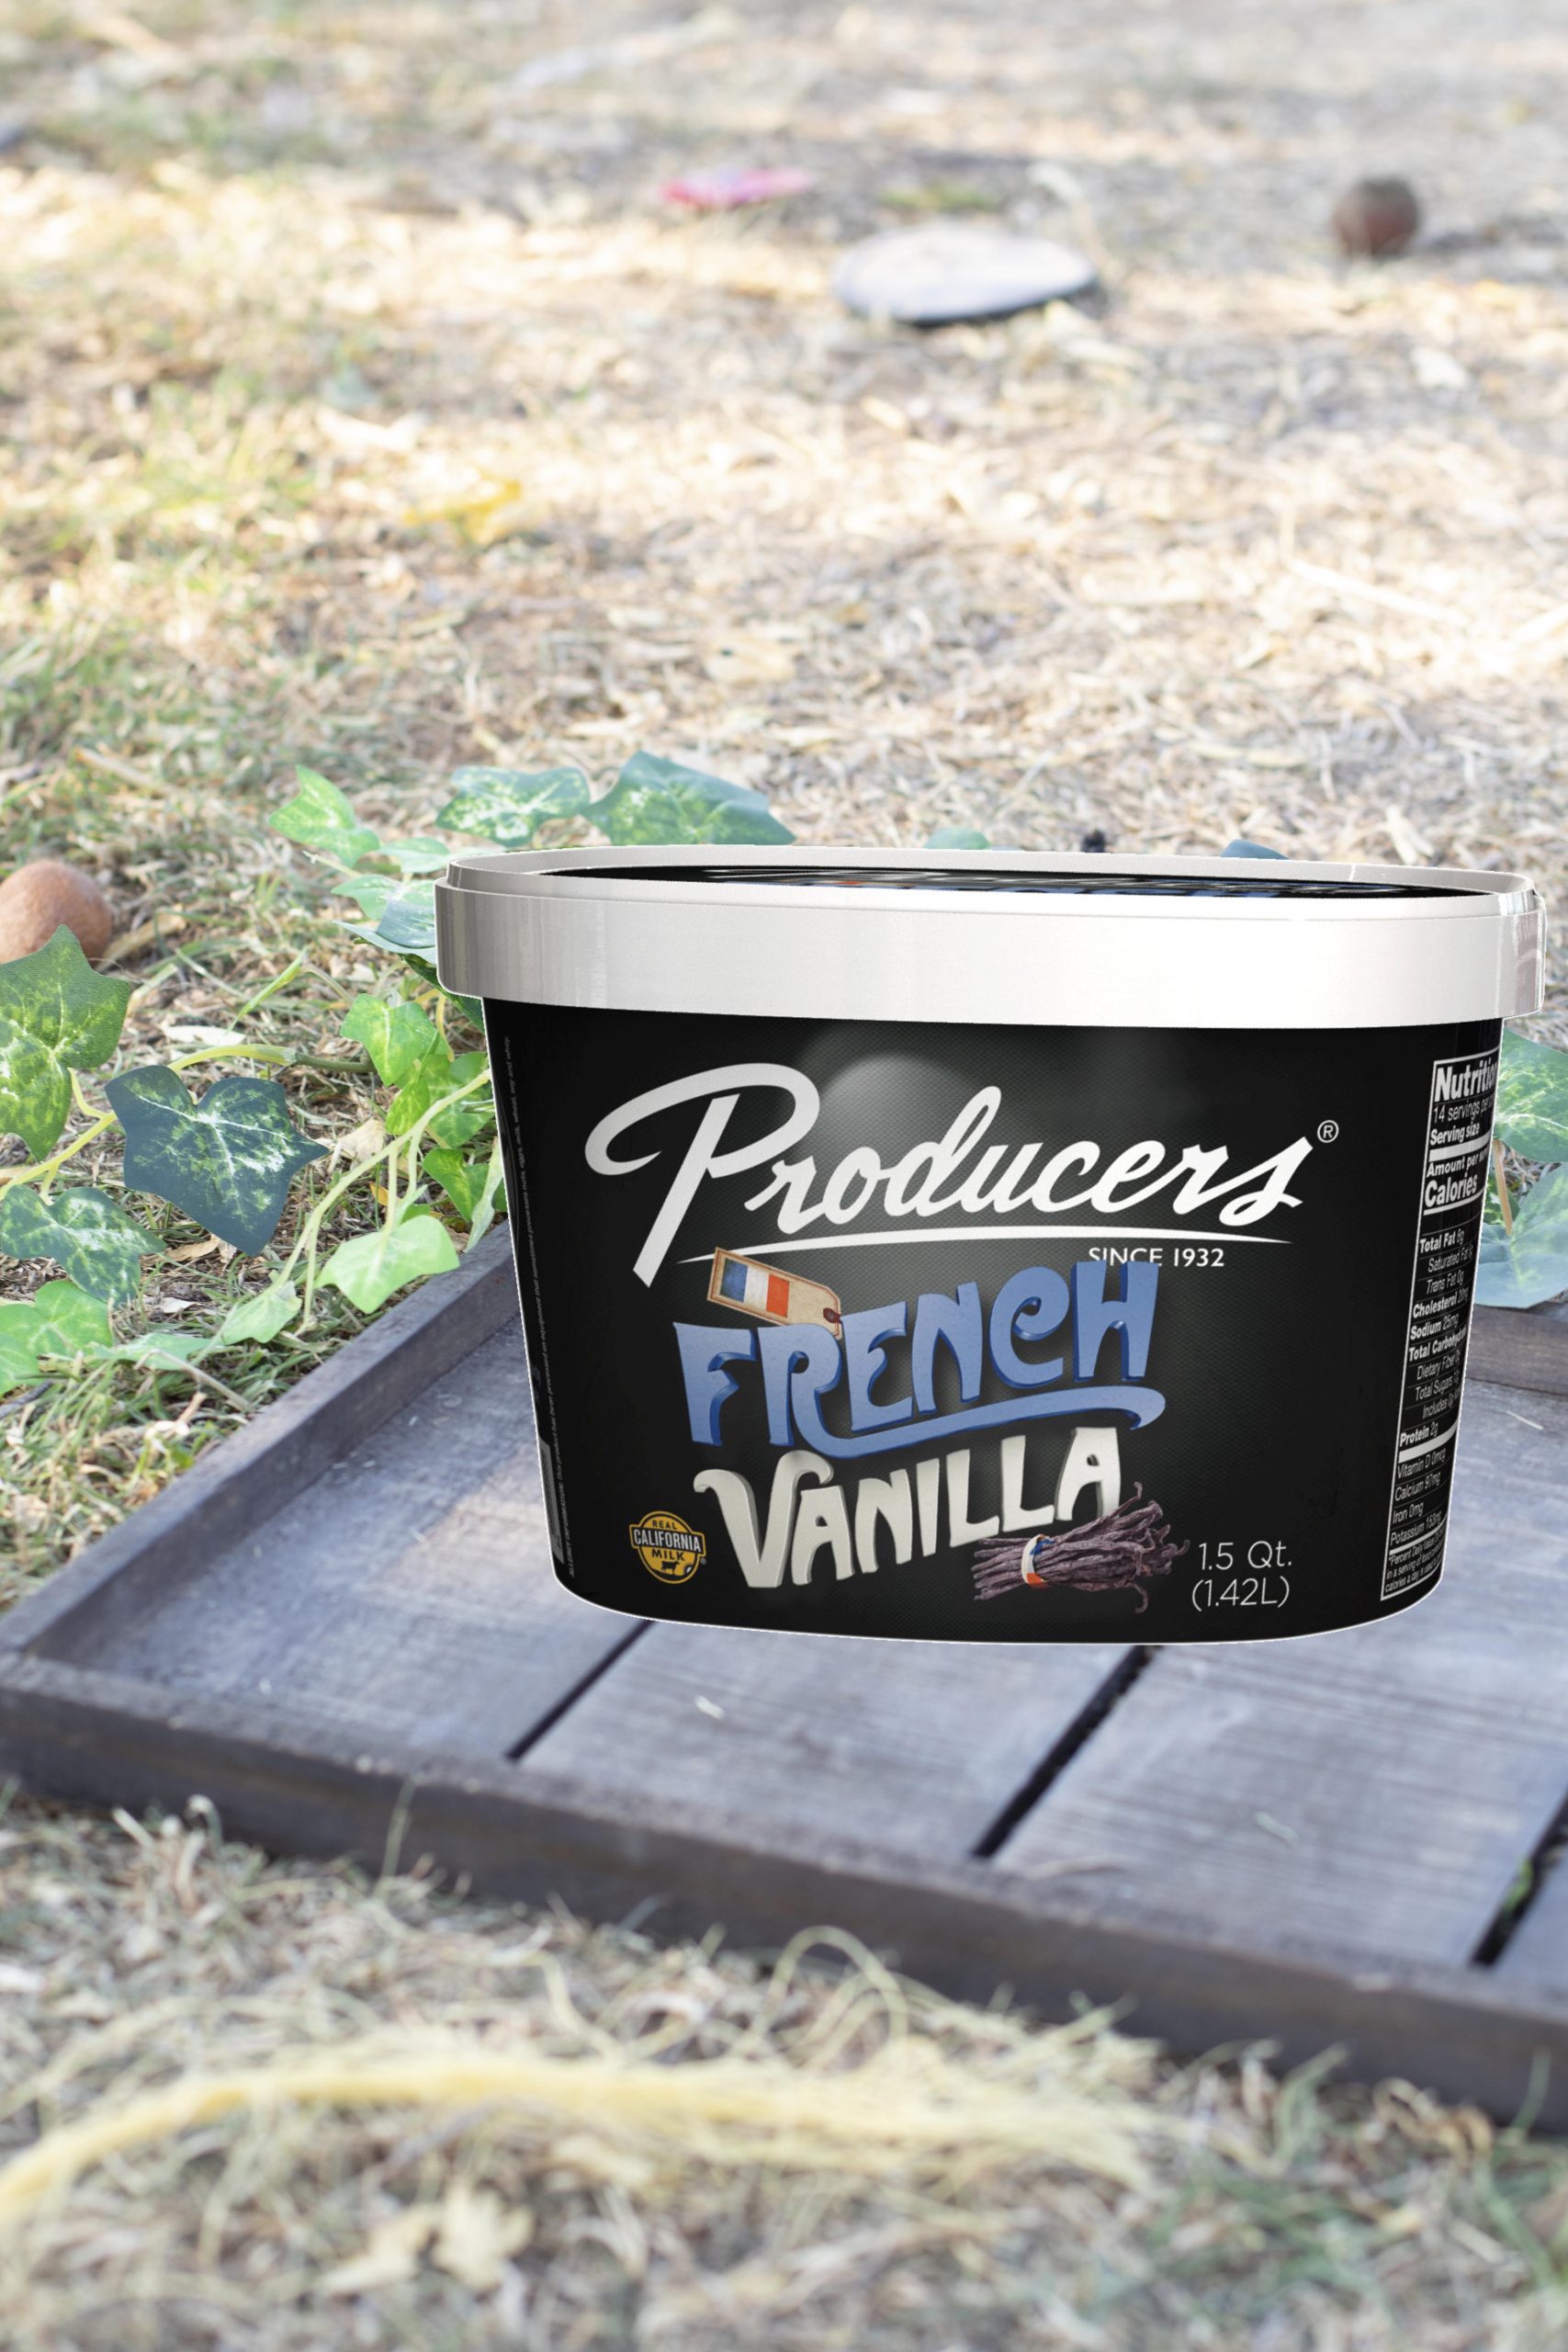 French Vanilla Producers Ice Cream sitting on wood on top of grass.